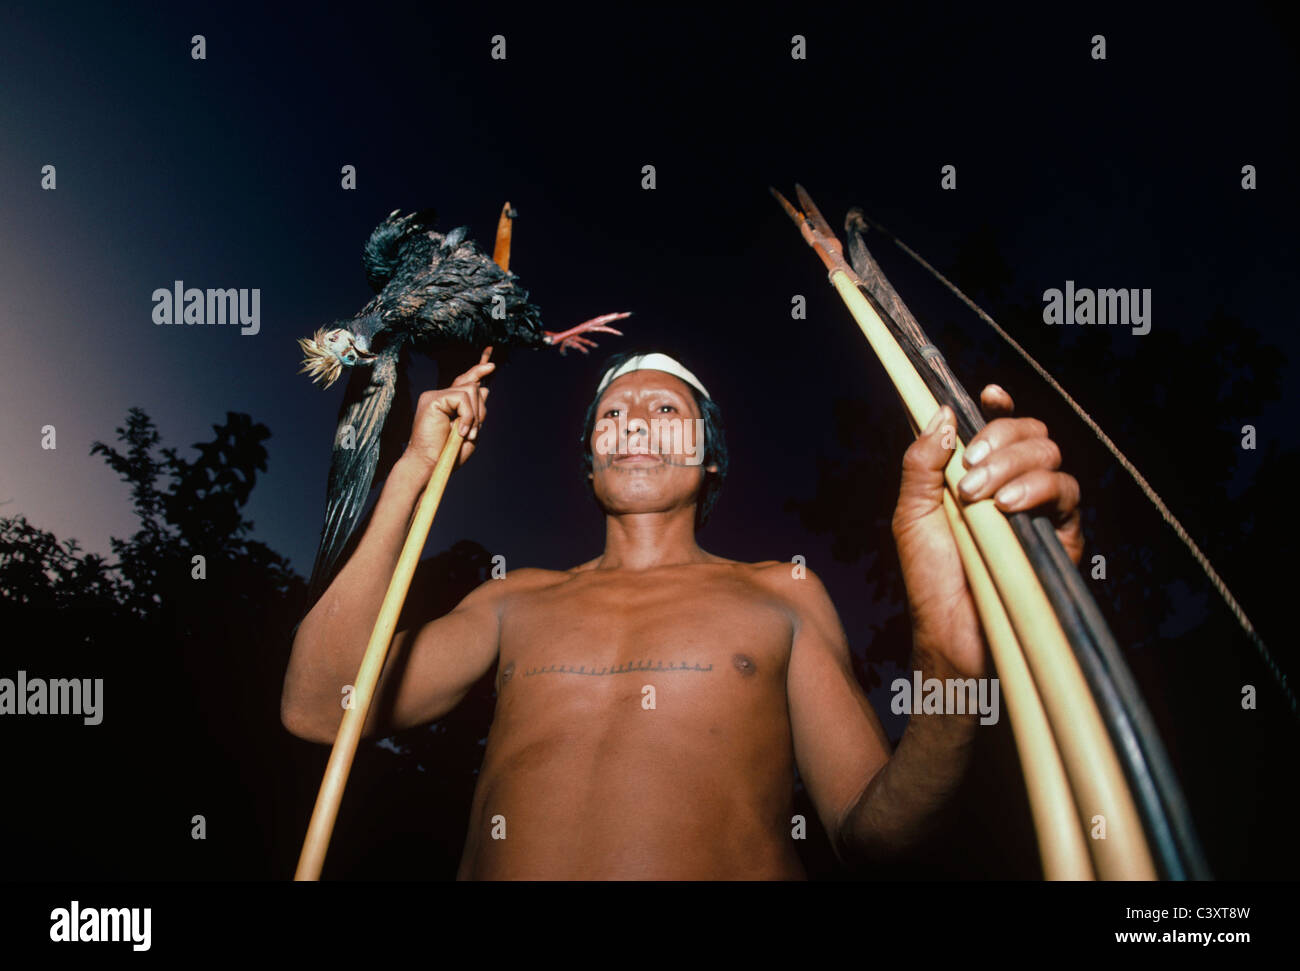 Matses tribesman with a duck (piping guan) from the Amazon killed with his bow and arrow. Matses Indians. Amazon, Peru. Stock Photo